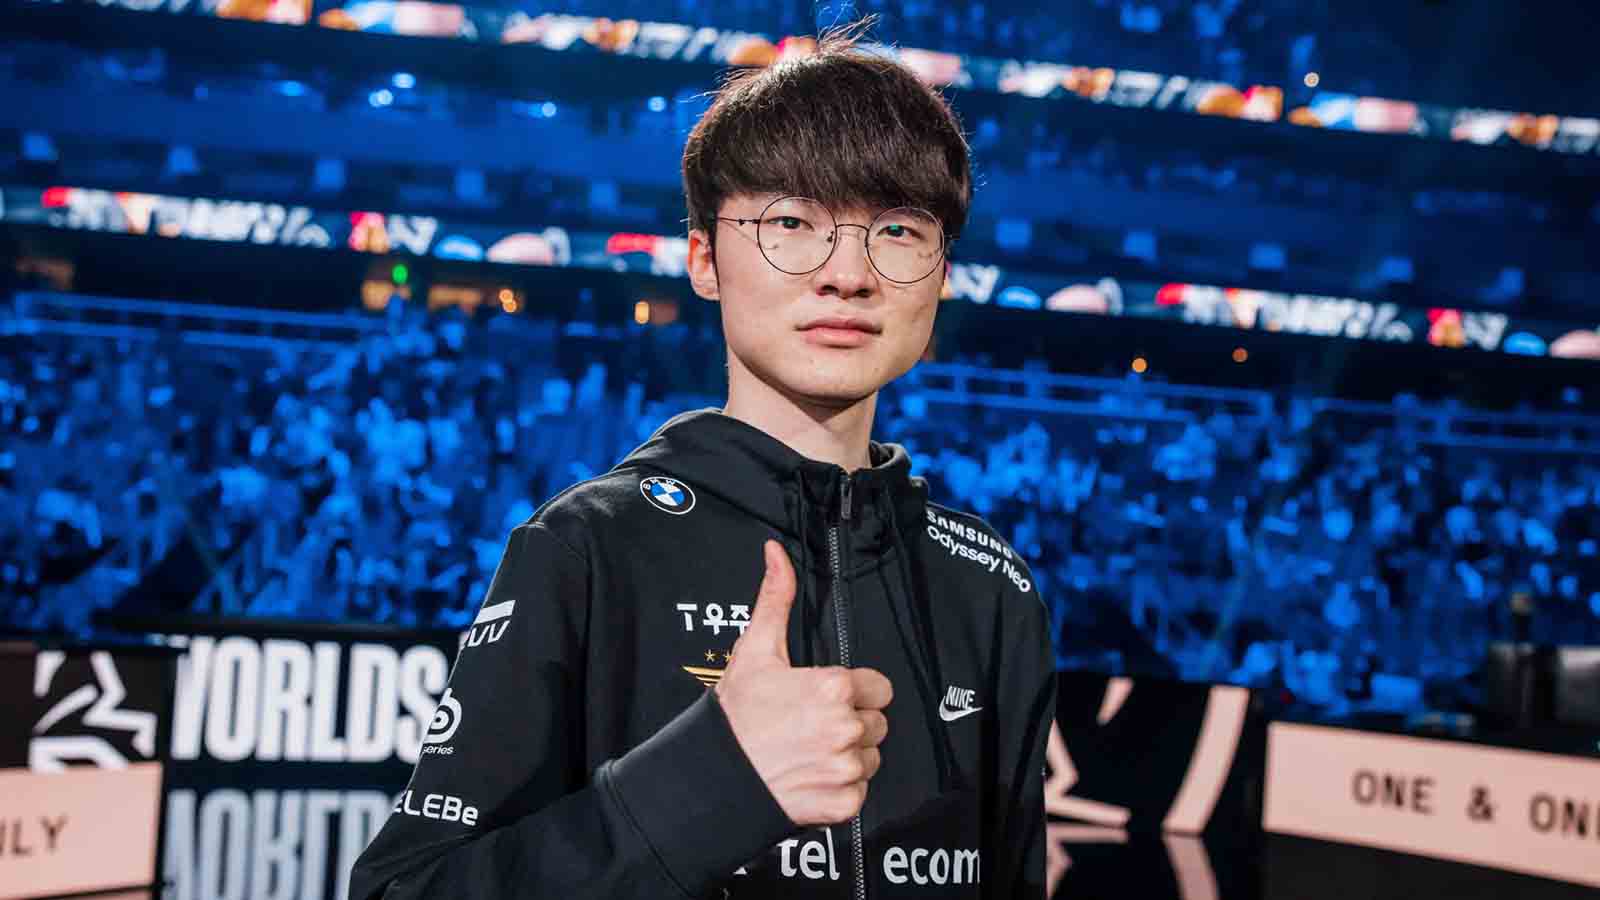 About Faker in 2023: Why bet on Faker